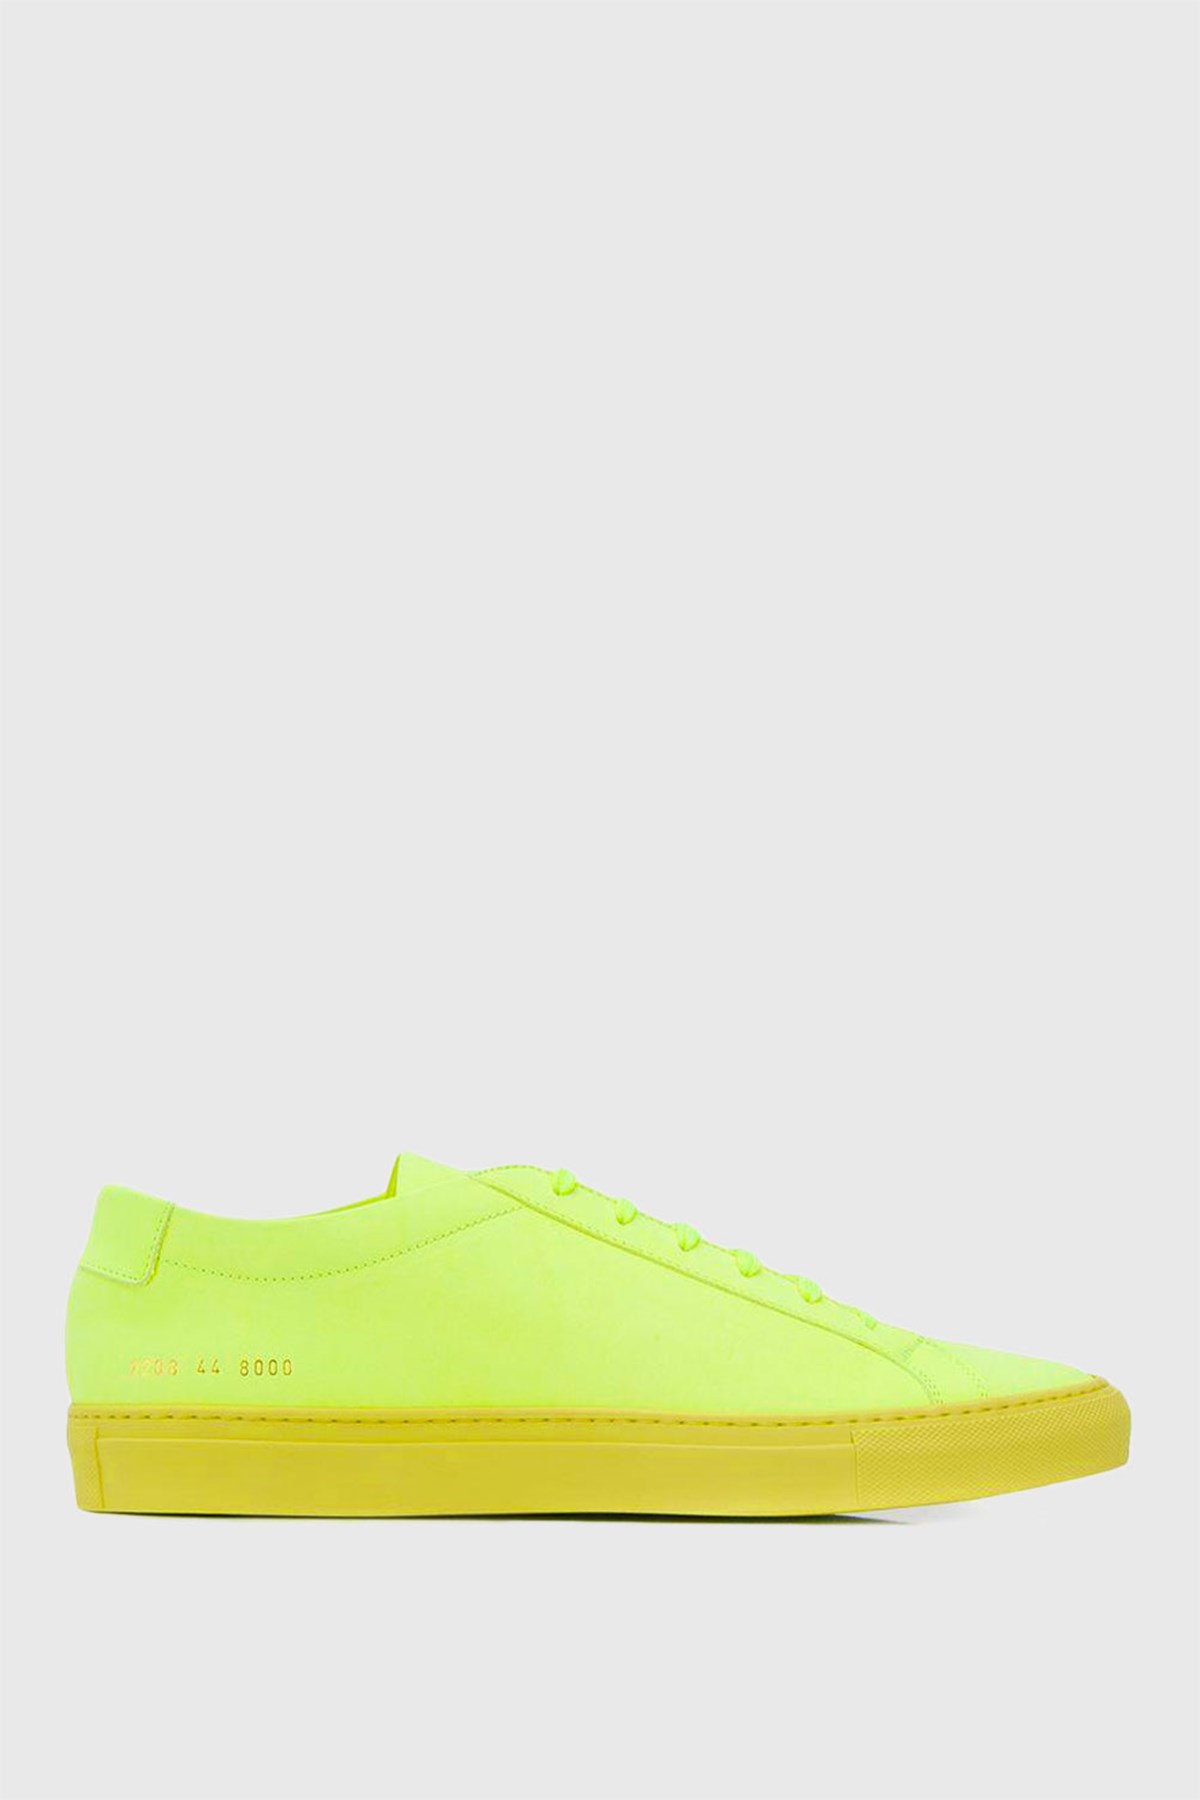 common projects yellow